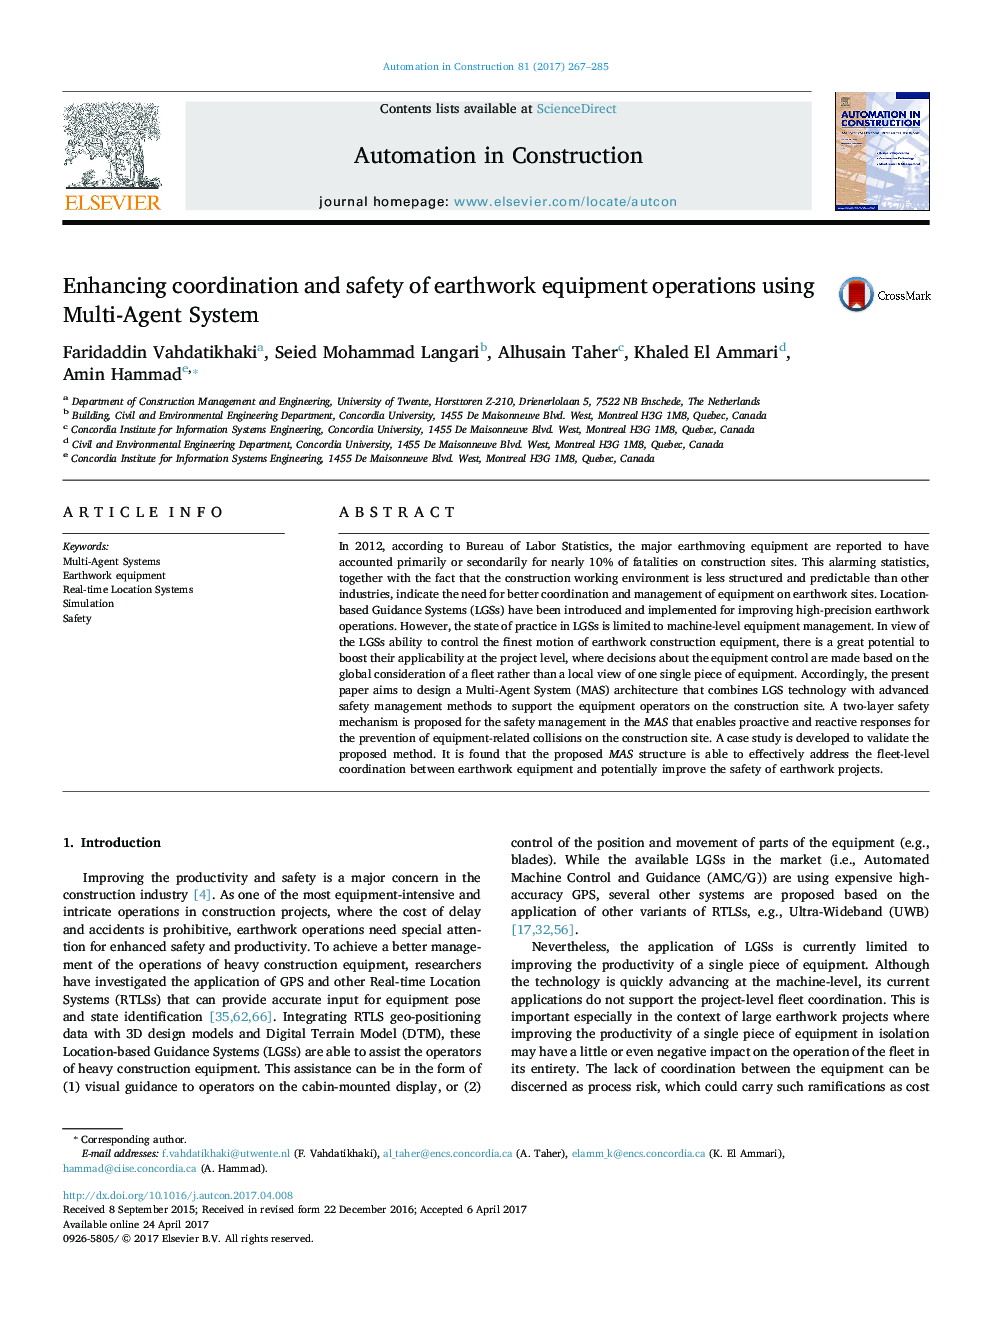 Enhancing coordination and safety of earthwork equipment operations using Multi-Agent System